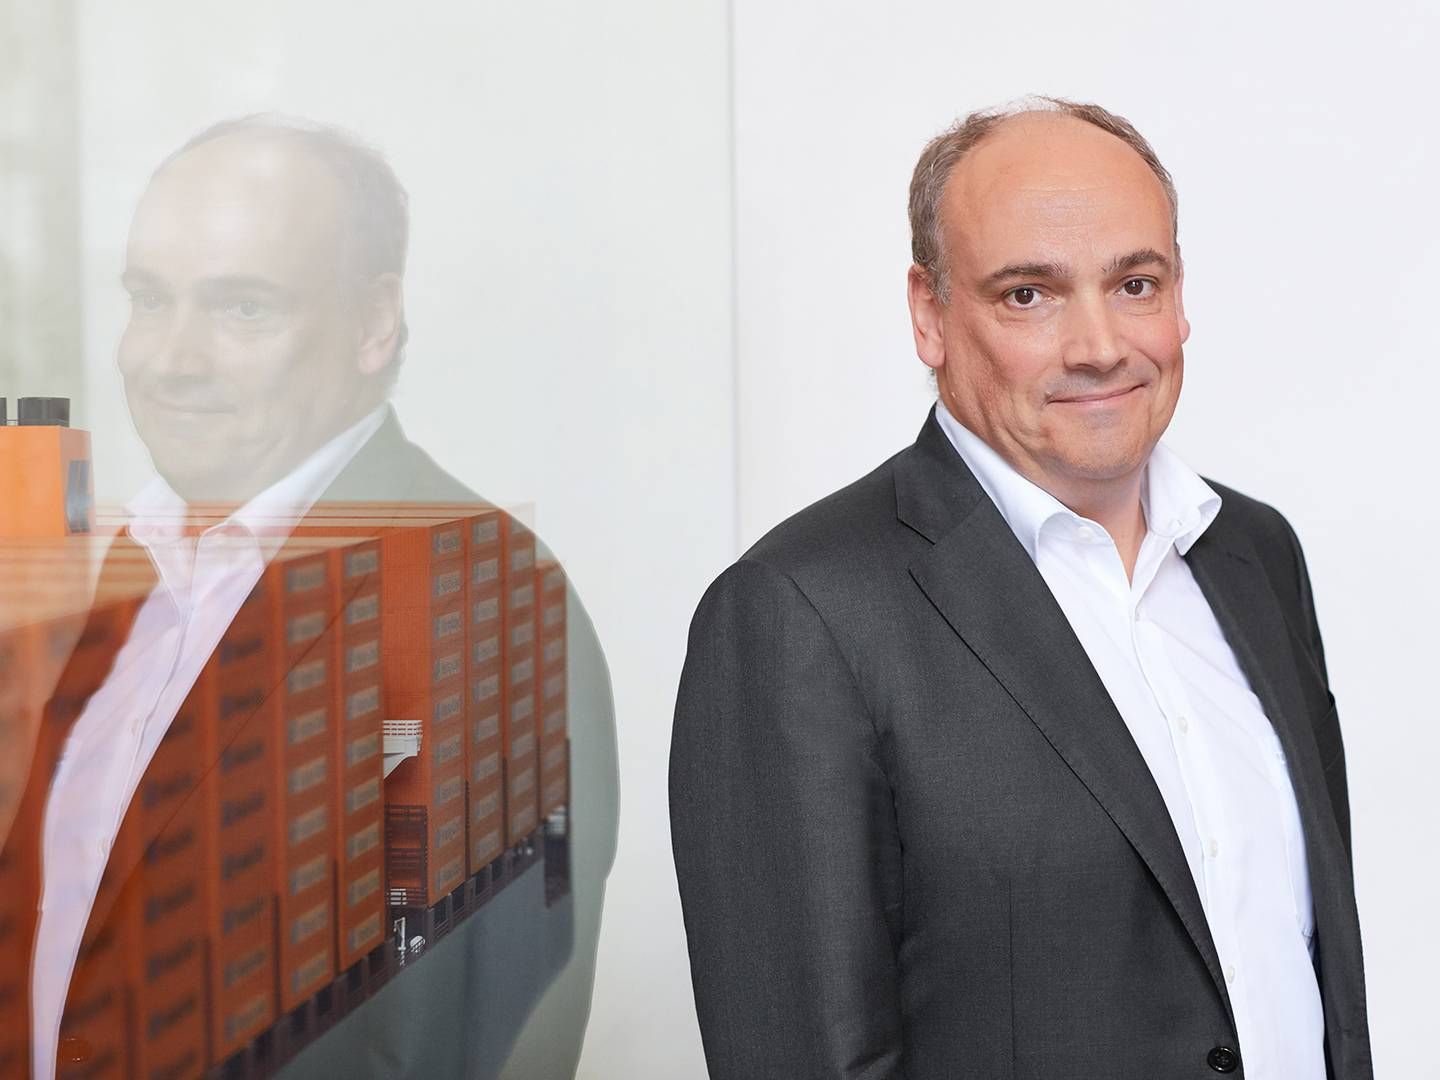 ”We have to ensure investment in green energy for renewal maritime fuel production and the supply infrastructure that comes with it. That will be crucial for the energy transition,” said the Hapaq-Lloyd CEO. | Photo: Hapag-lloyd